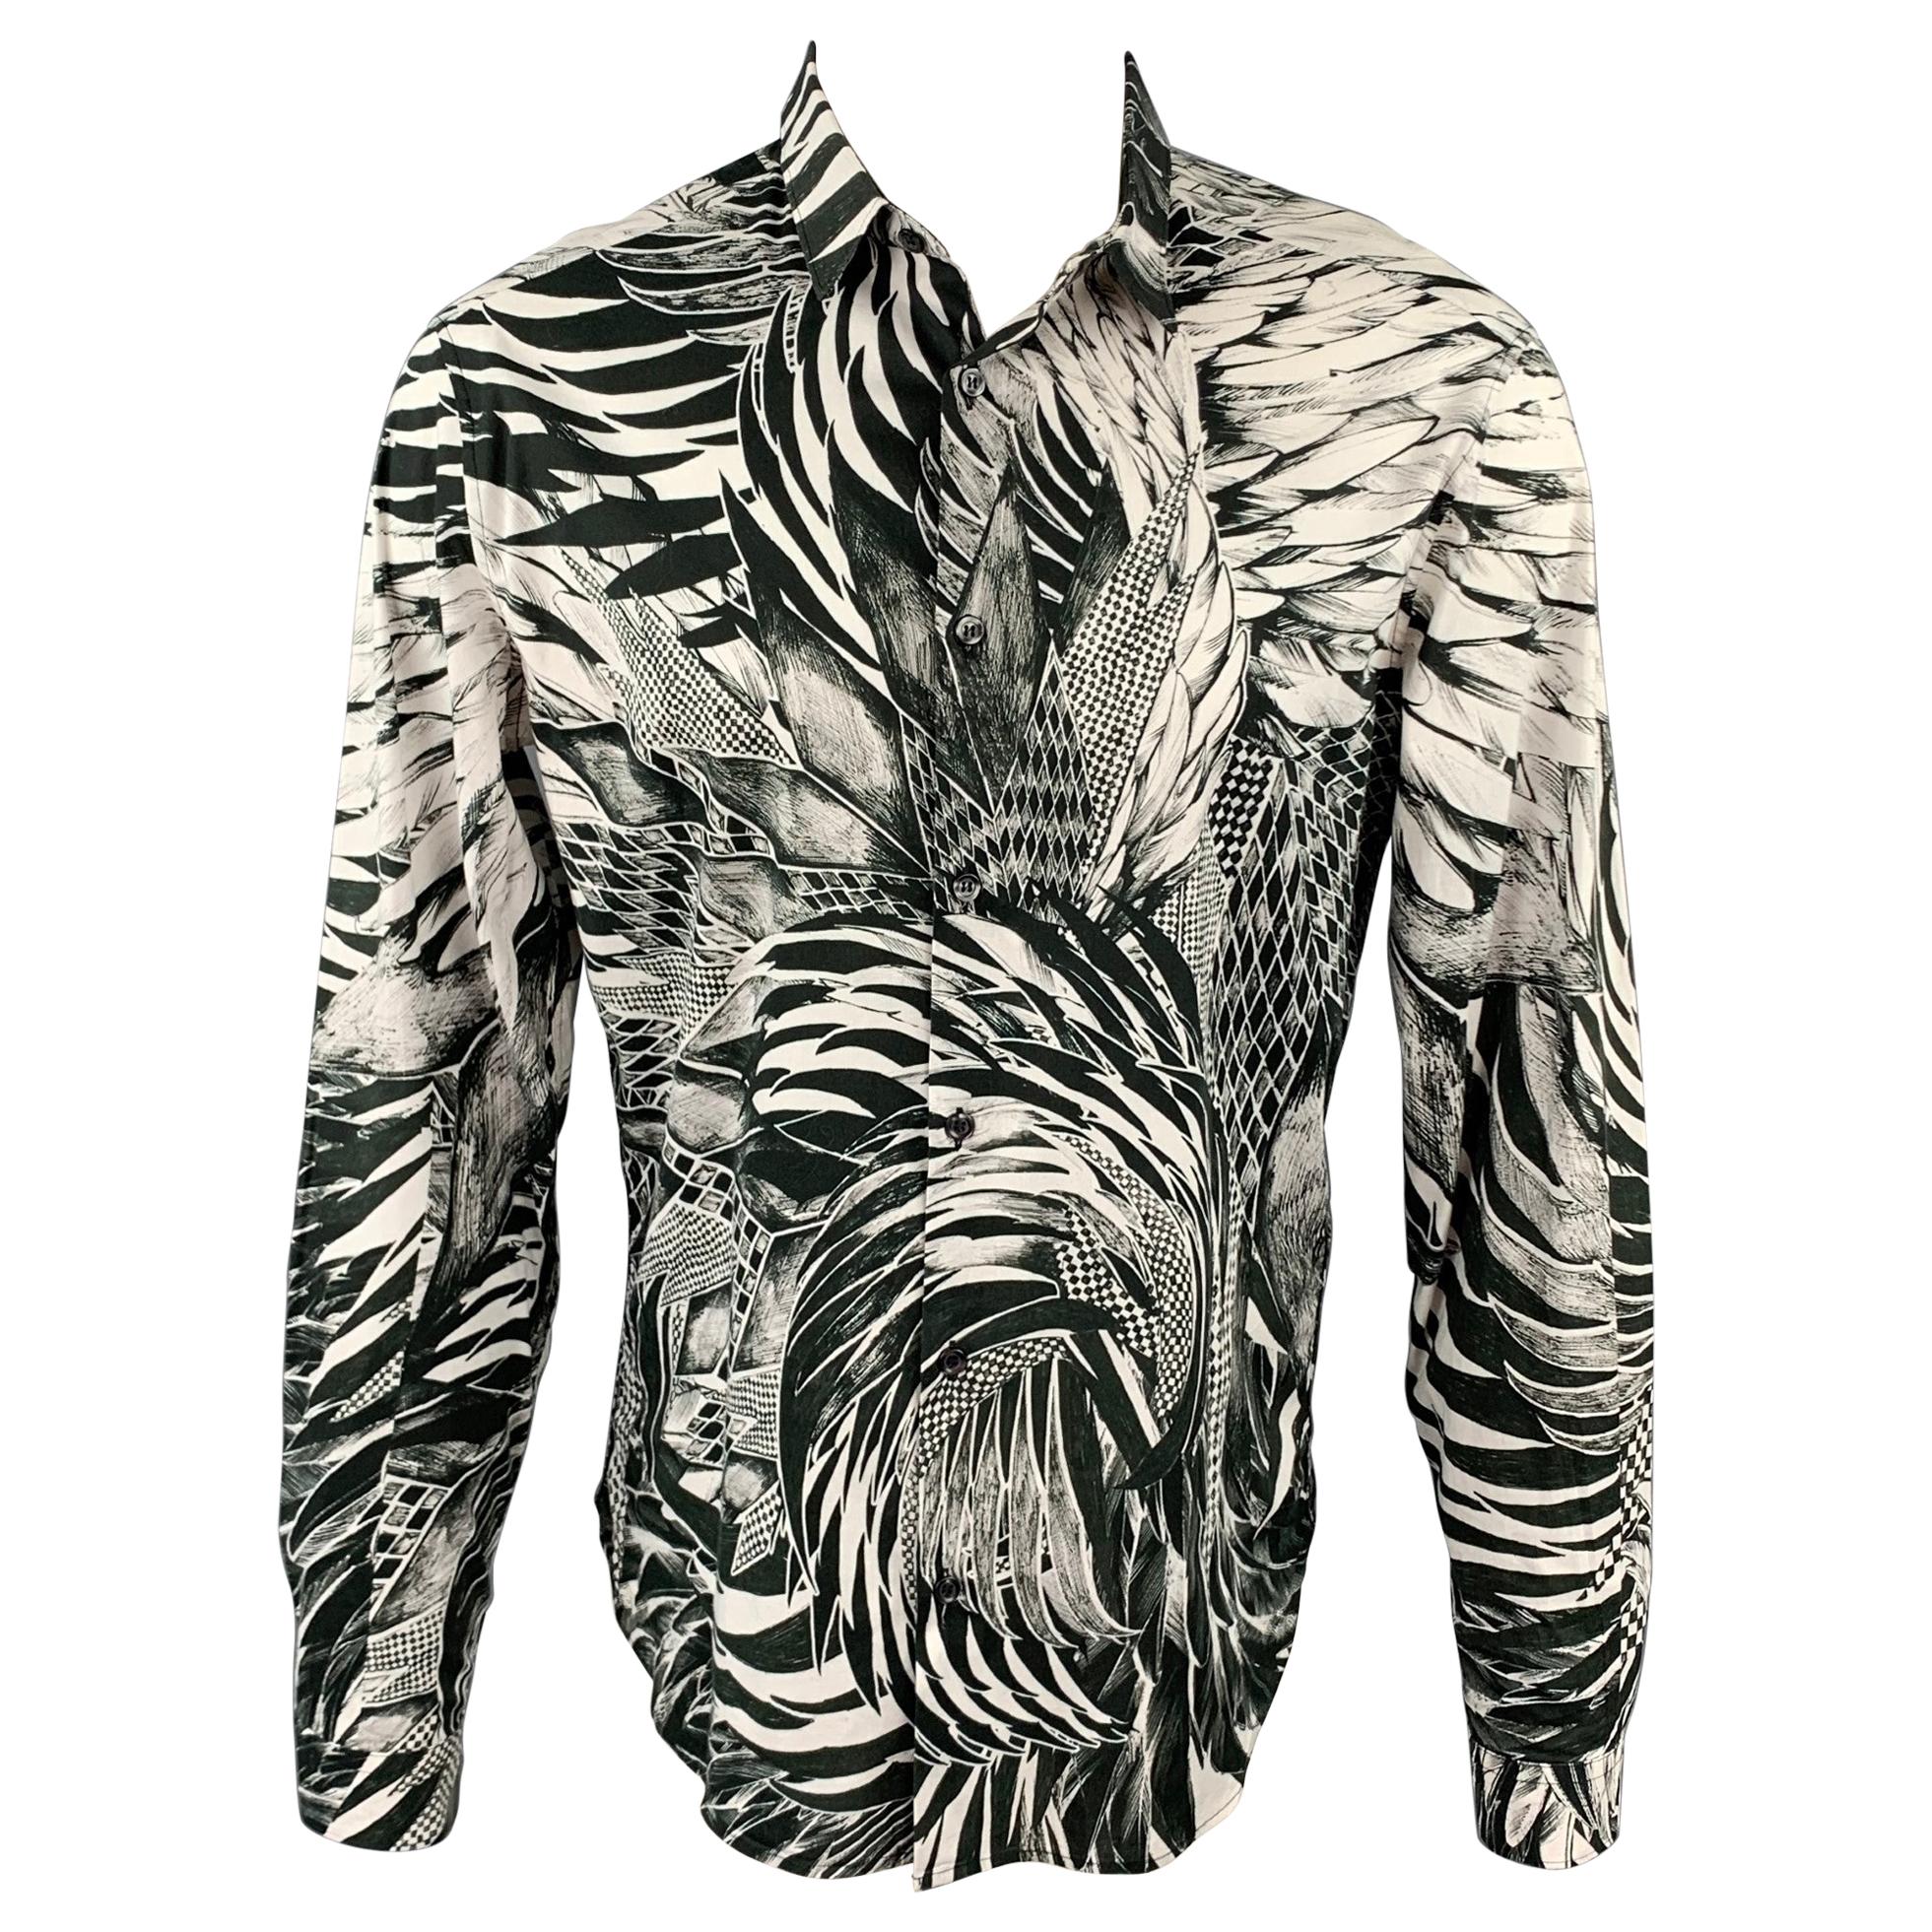 JUST CAVALLI Size M Black & White Abstract Print Cotton Button Up Shirt